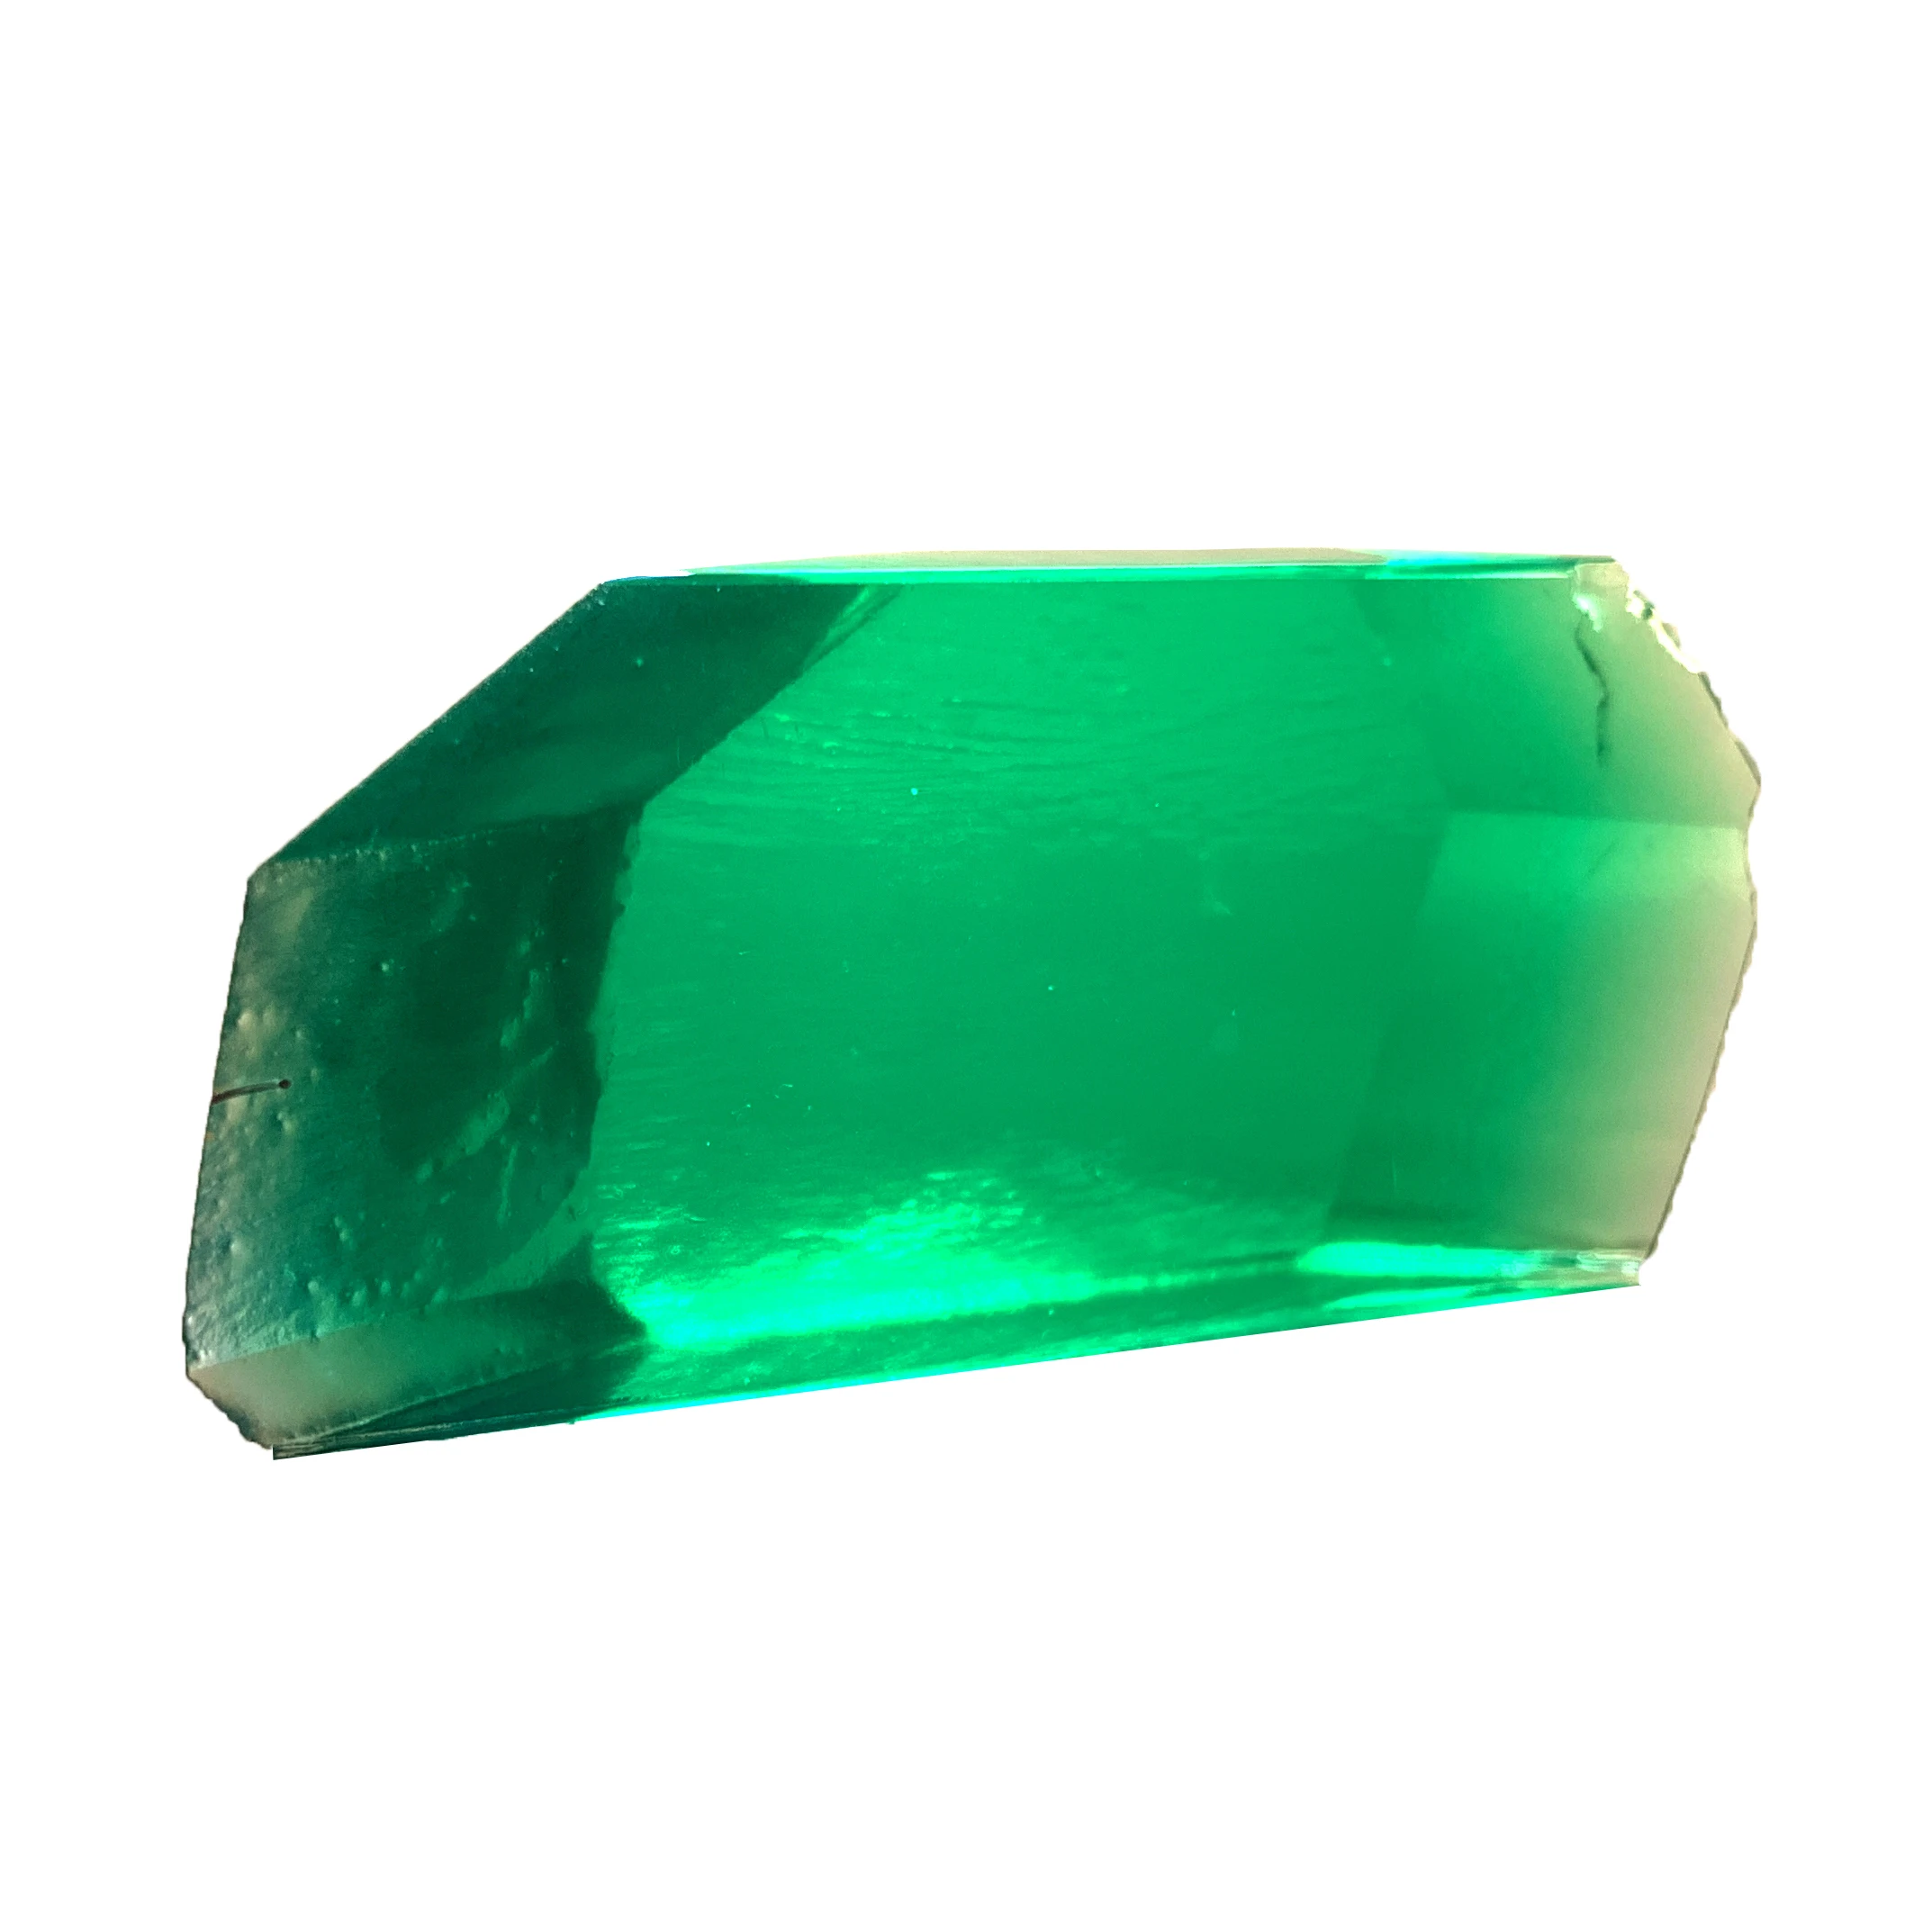 Lab Grown Emerald Colombiacolombian Color Flawless Rough Buy Emerald